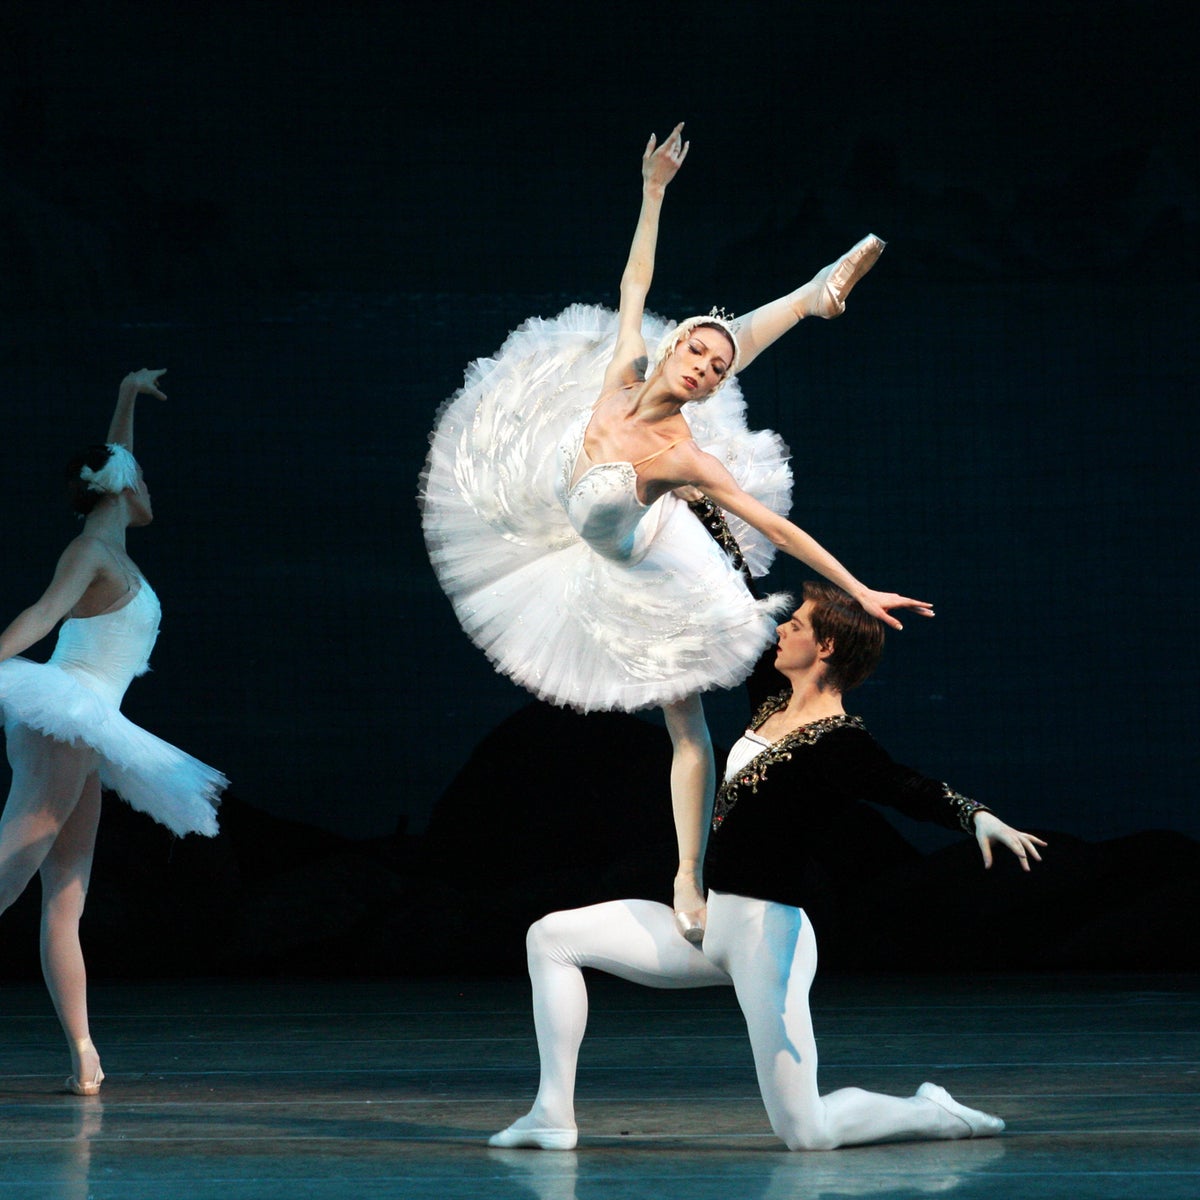 Is classical ballet sexist? From Swan Lake to The Sleeping Beauty, it's time to look again at the work of Marius Petipa
